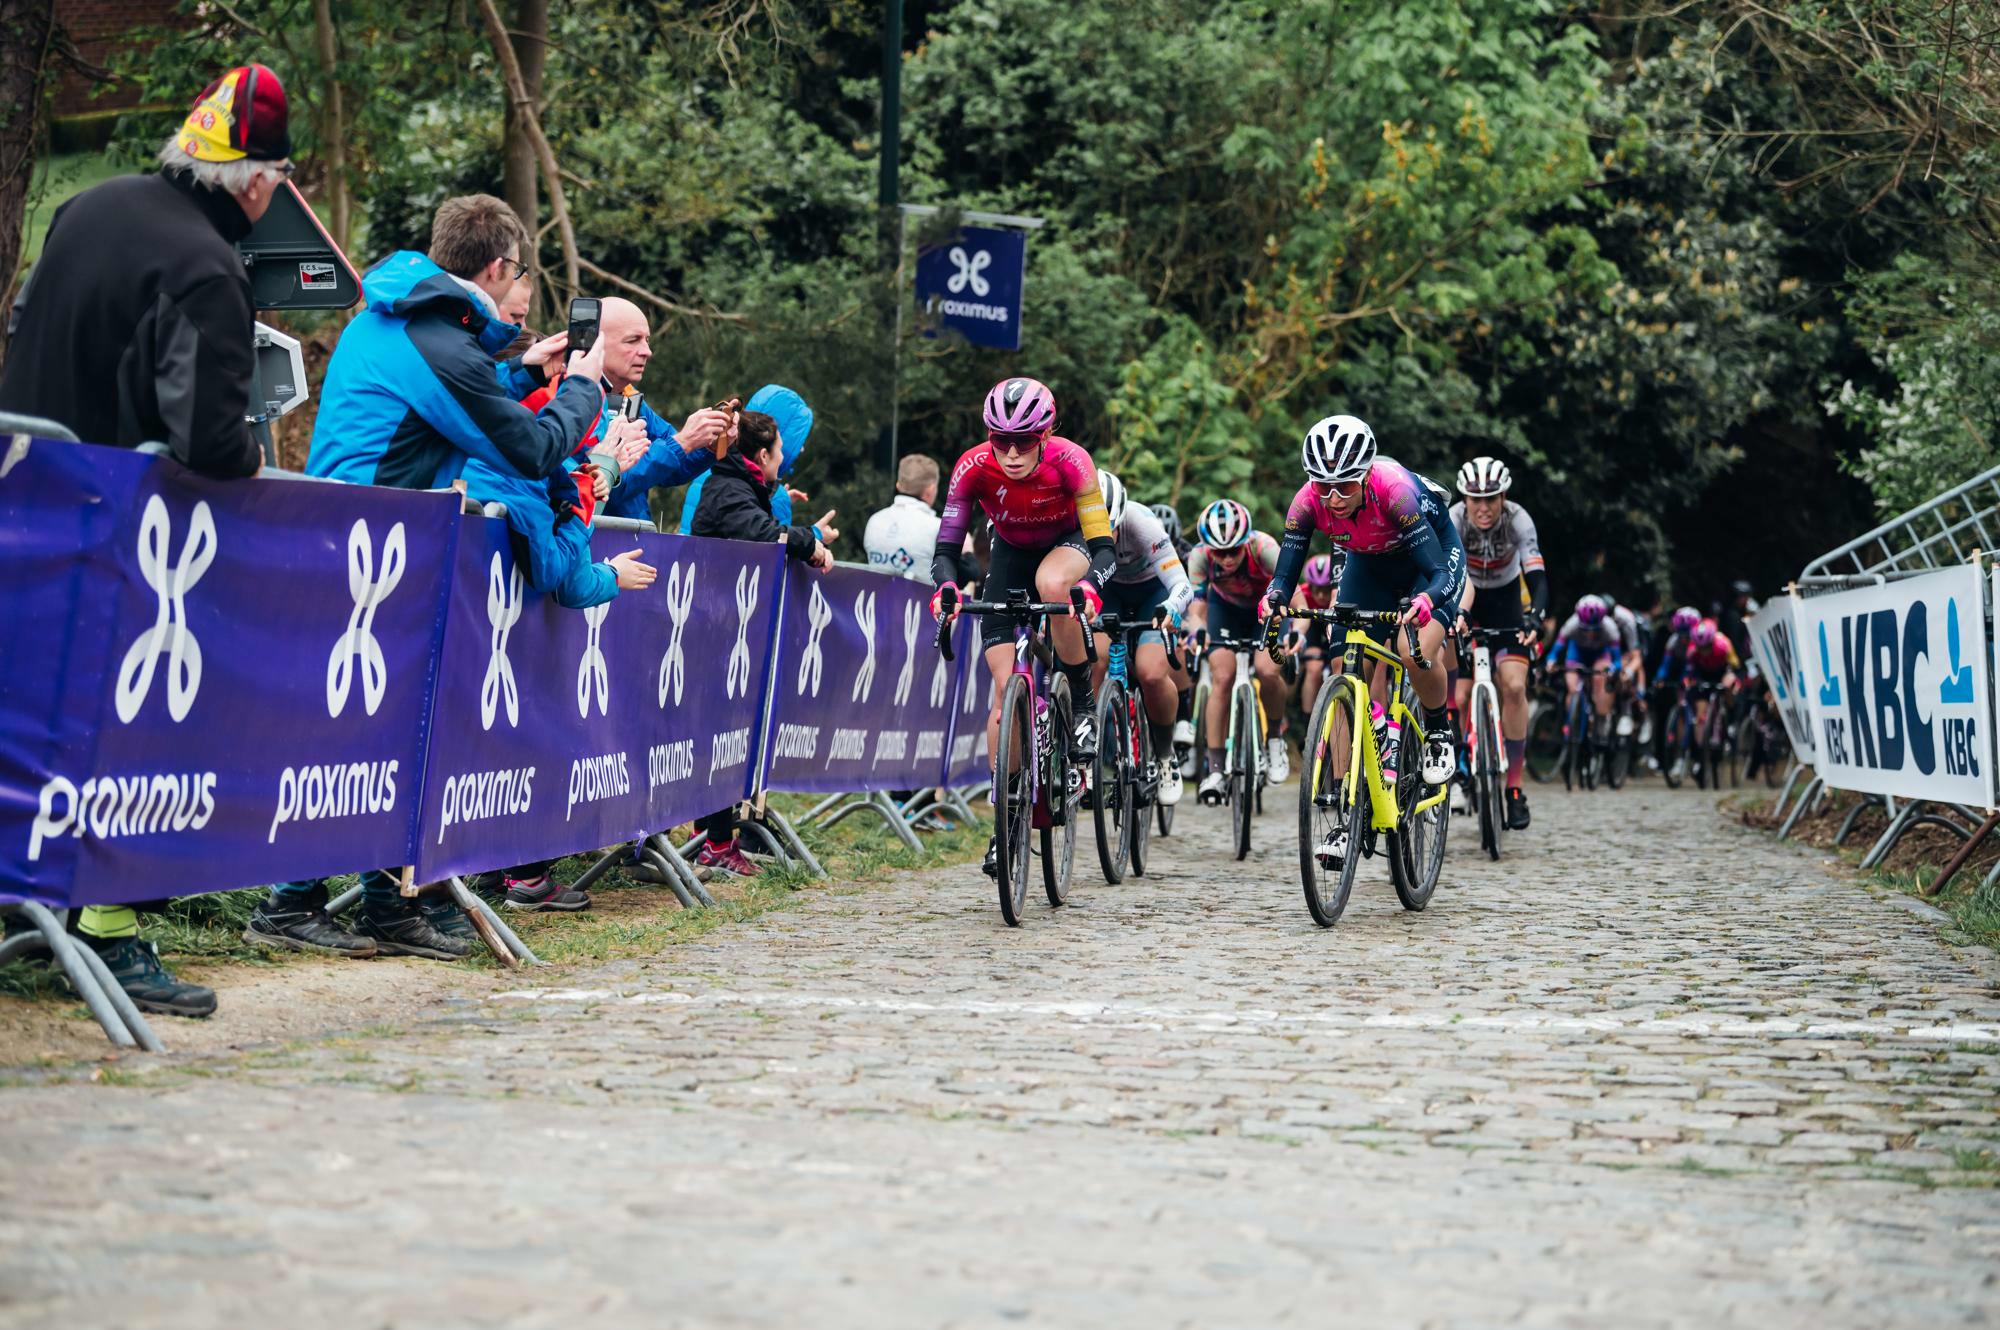 Follow the women's race thanks to the Proximus livestream